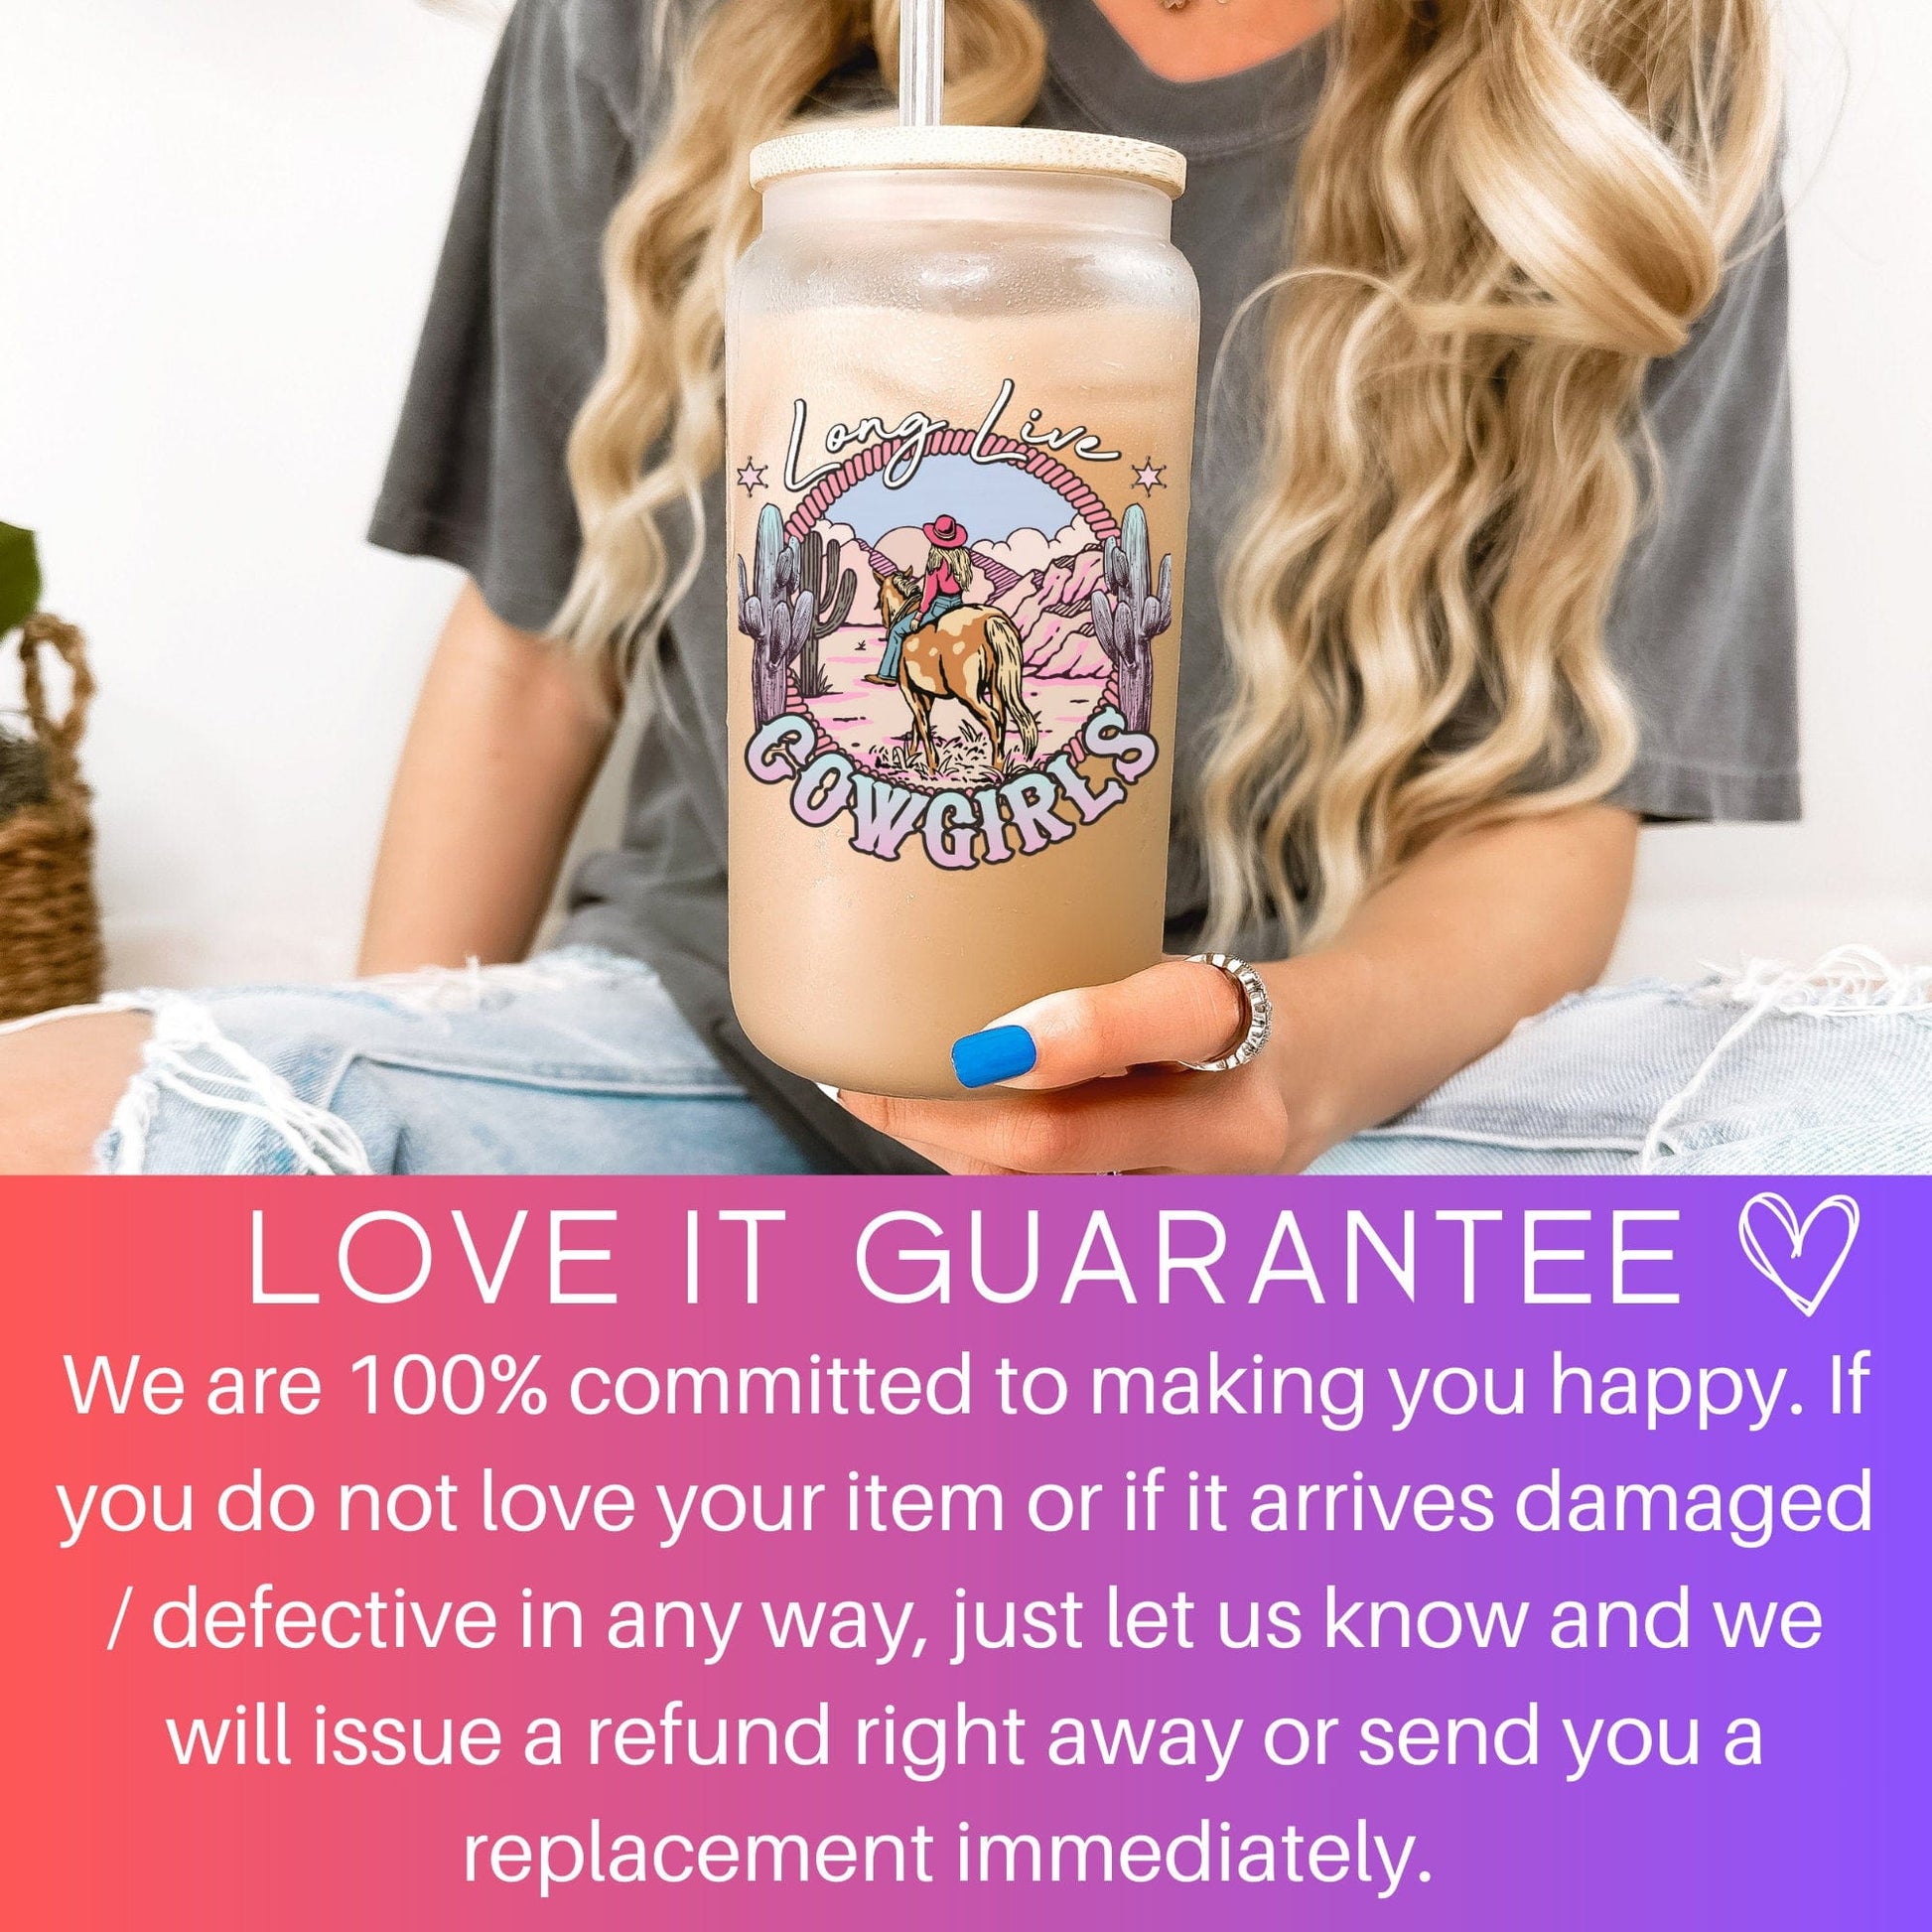 Country concert Frosted Iced Coffee Cup Long Live Cowgirls Frosted Tumbler with Straw Western Rodeo cowgirl Desert Vintage style beer Glass